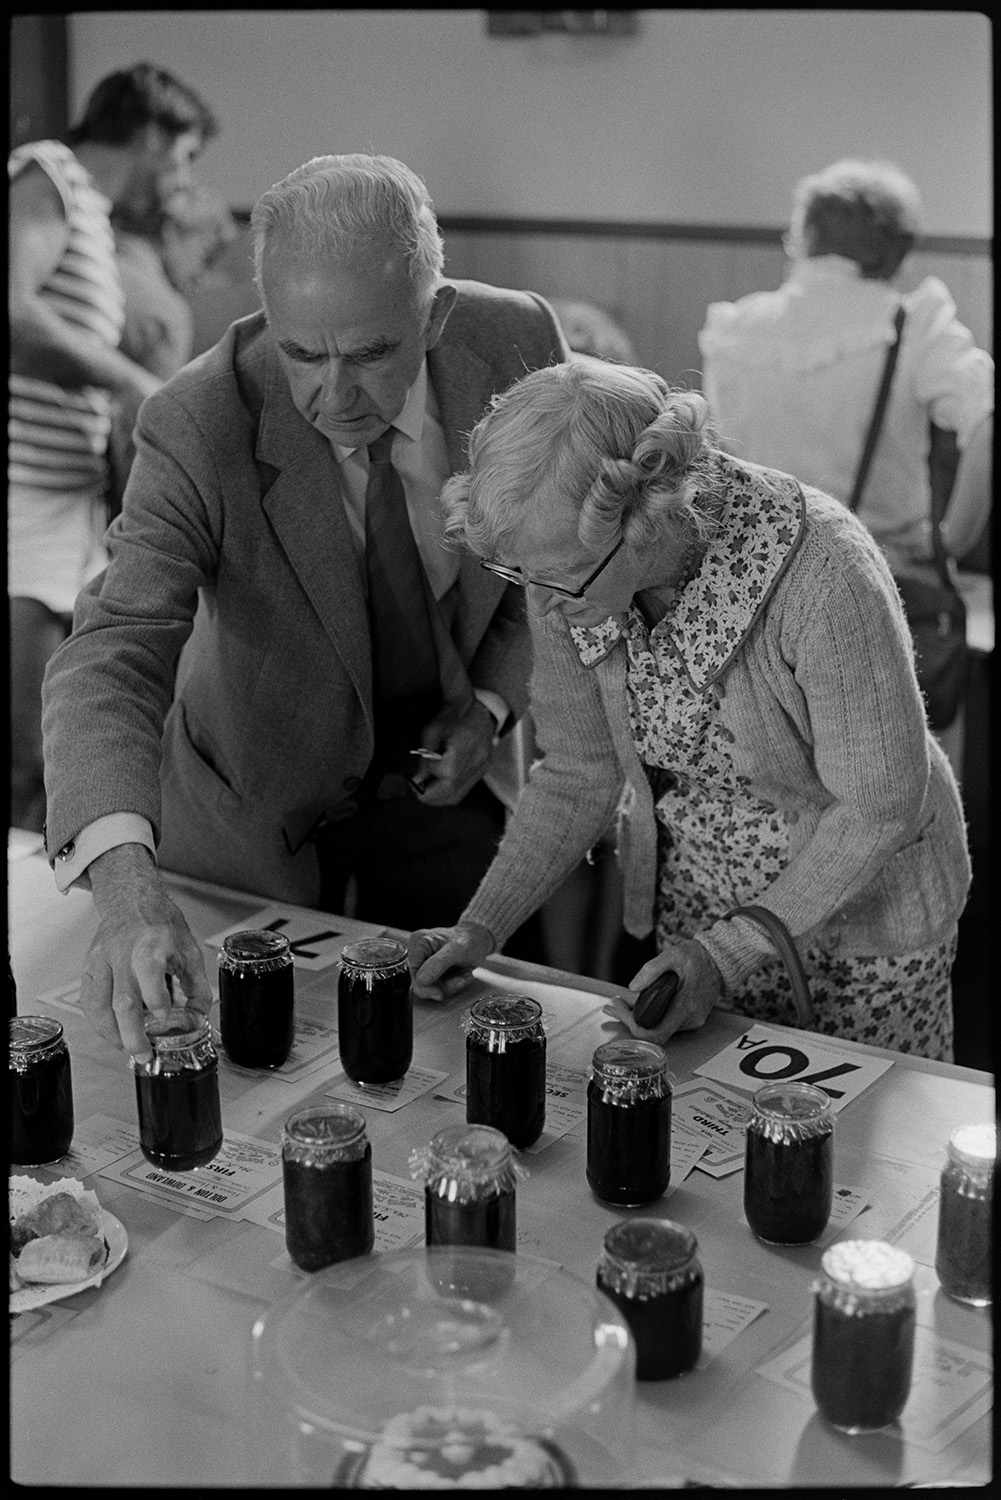 Flower show exhibits, jams, cups, sports, hot dog stall, bicycles, Clay Pigeon Shoot.
[Cyril Webber and a woman checking or judging the jam entries at the Dolton Flower Show in Dolton Village Hall.]